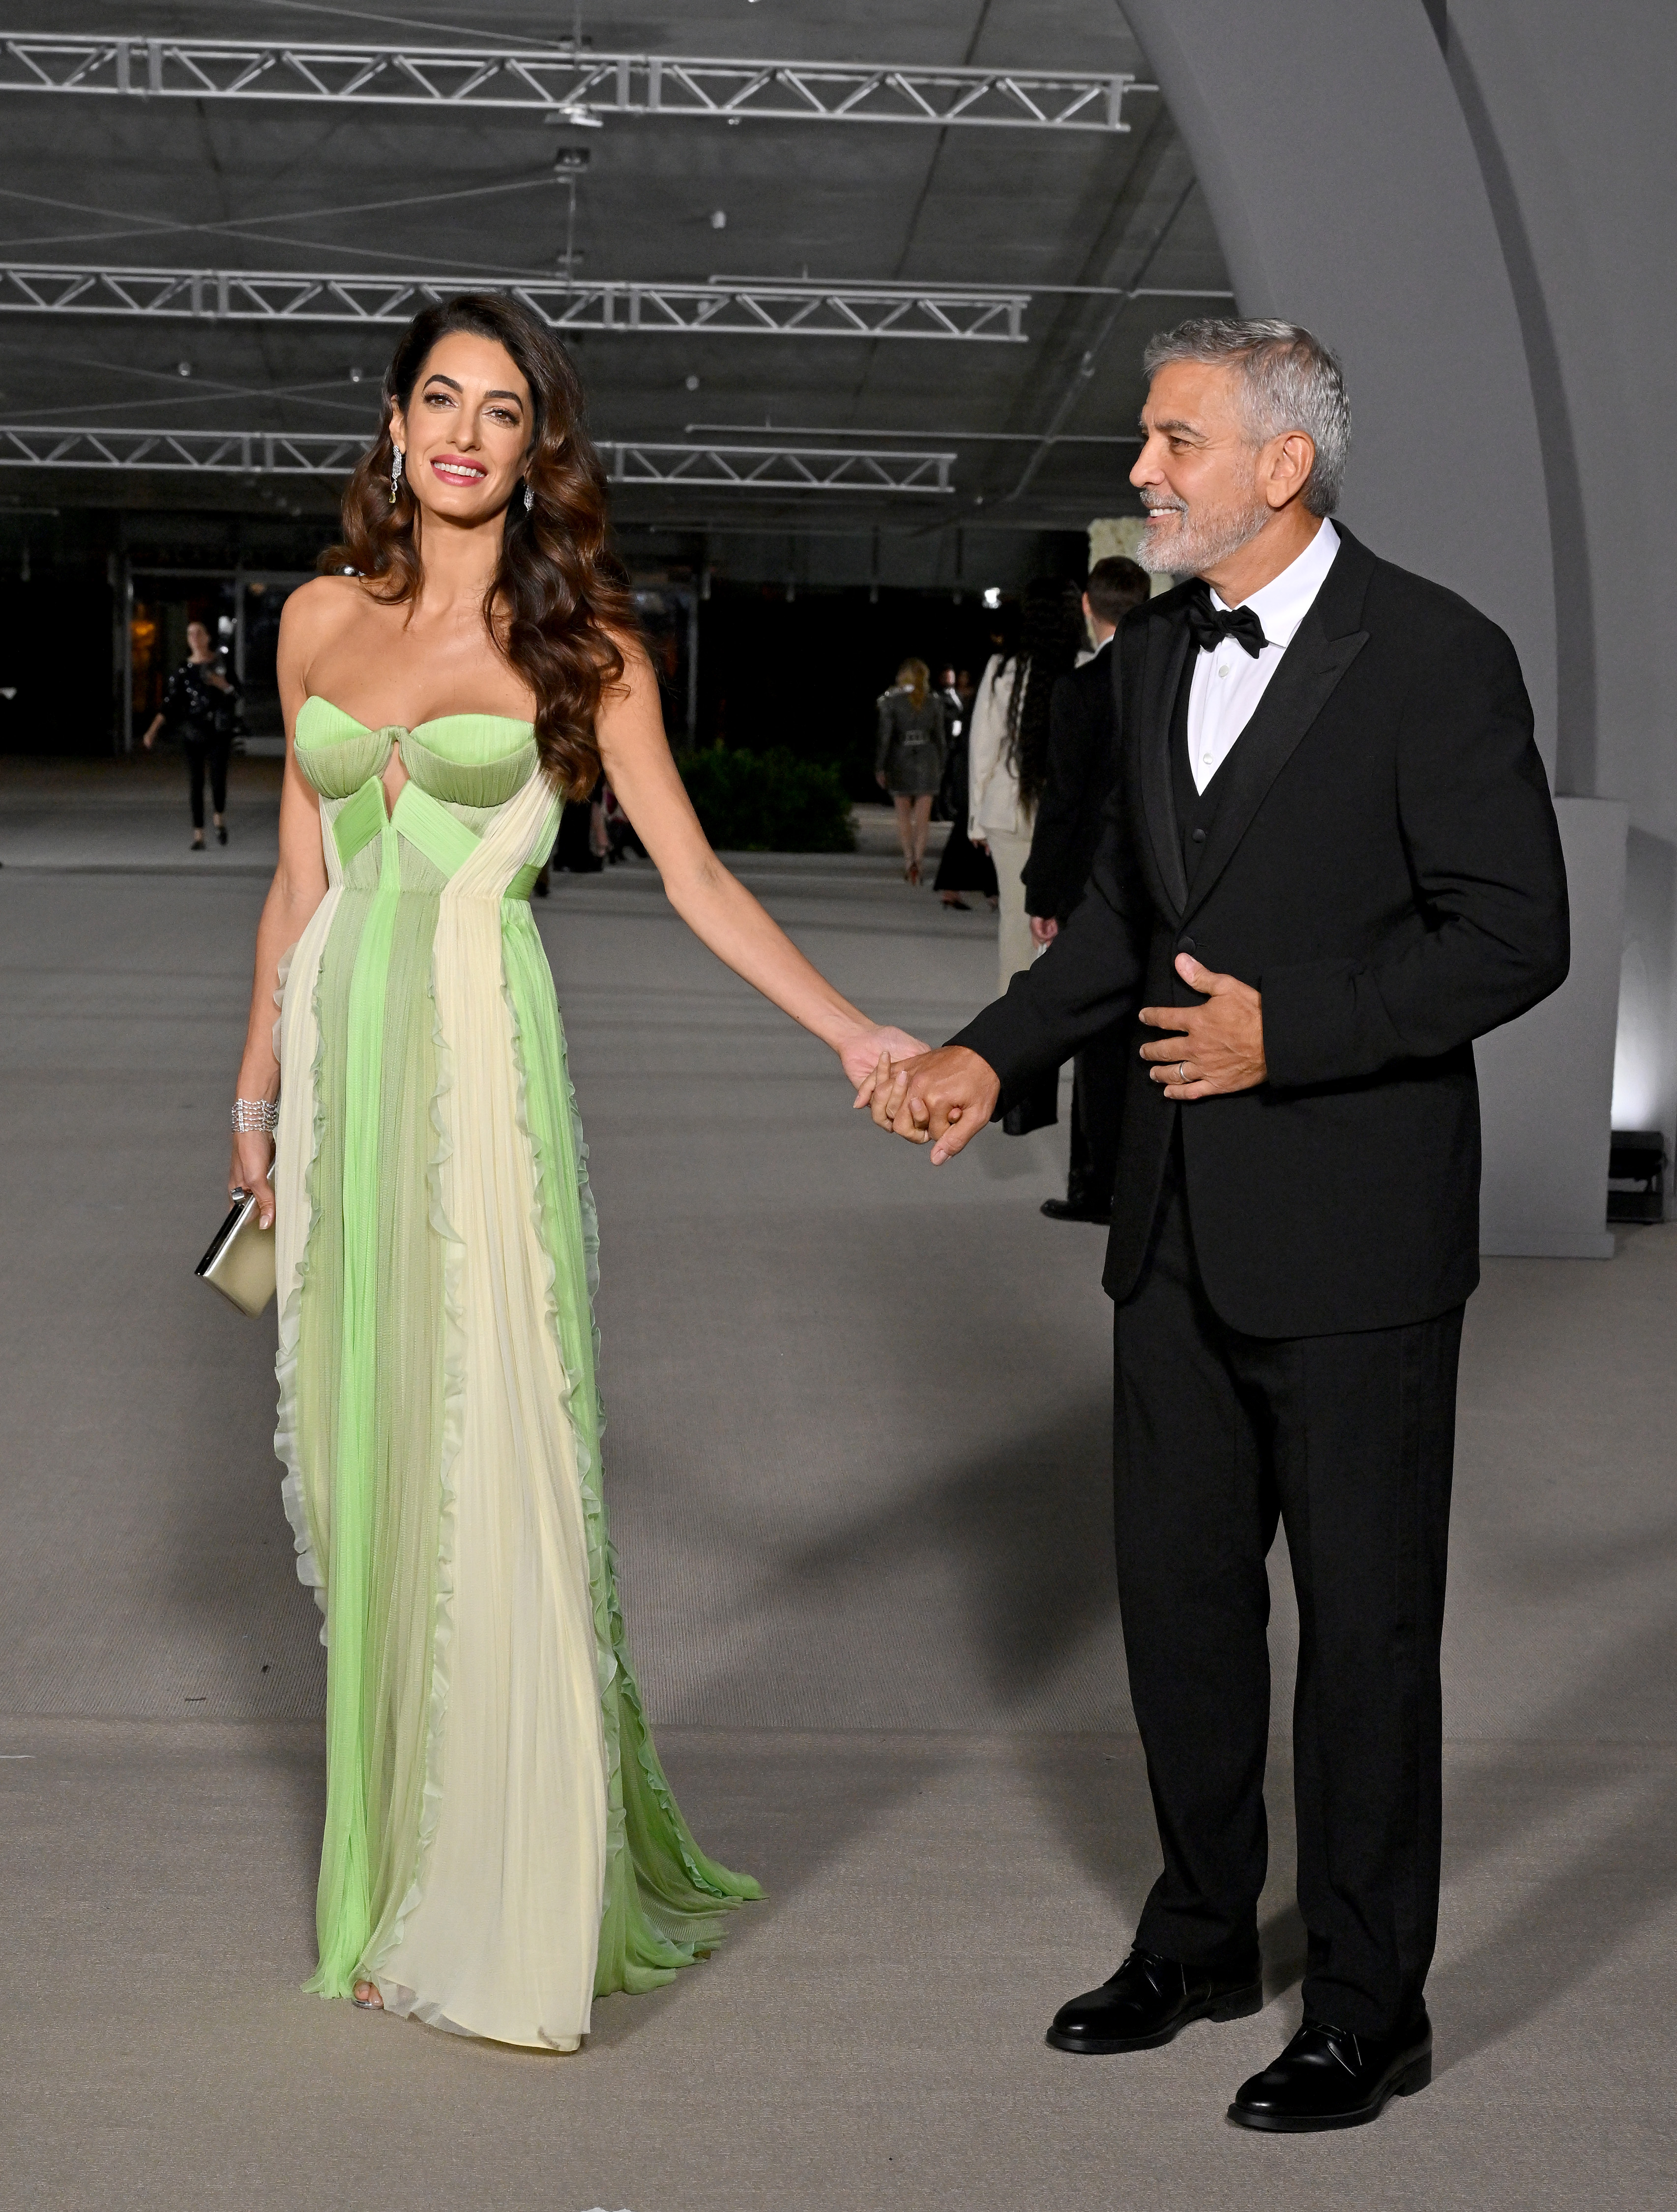 Amal and George Clooney at the 2nd Annual Academy Museum Gala in Los Angeles, California on October 15, 2022 | Source: Getty Images